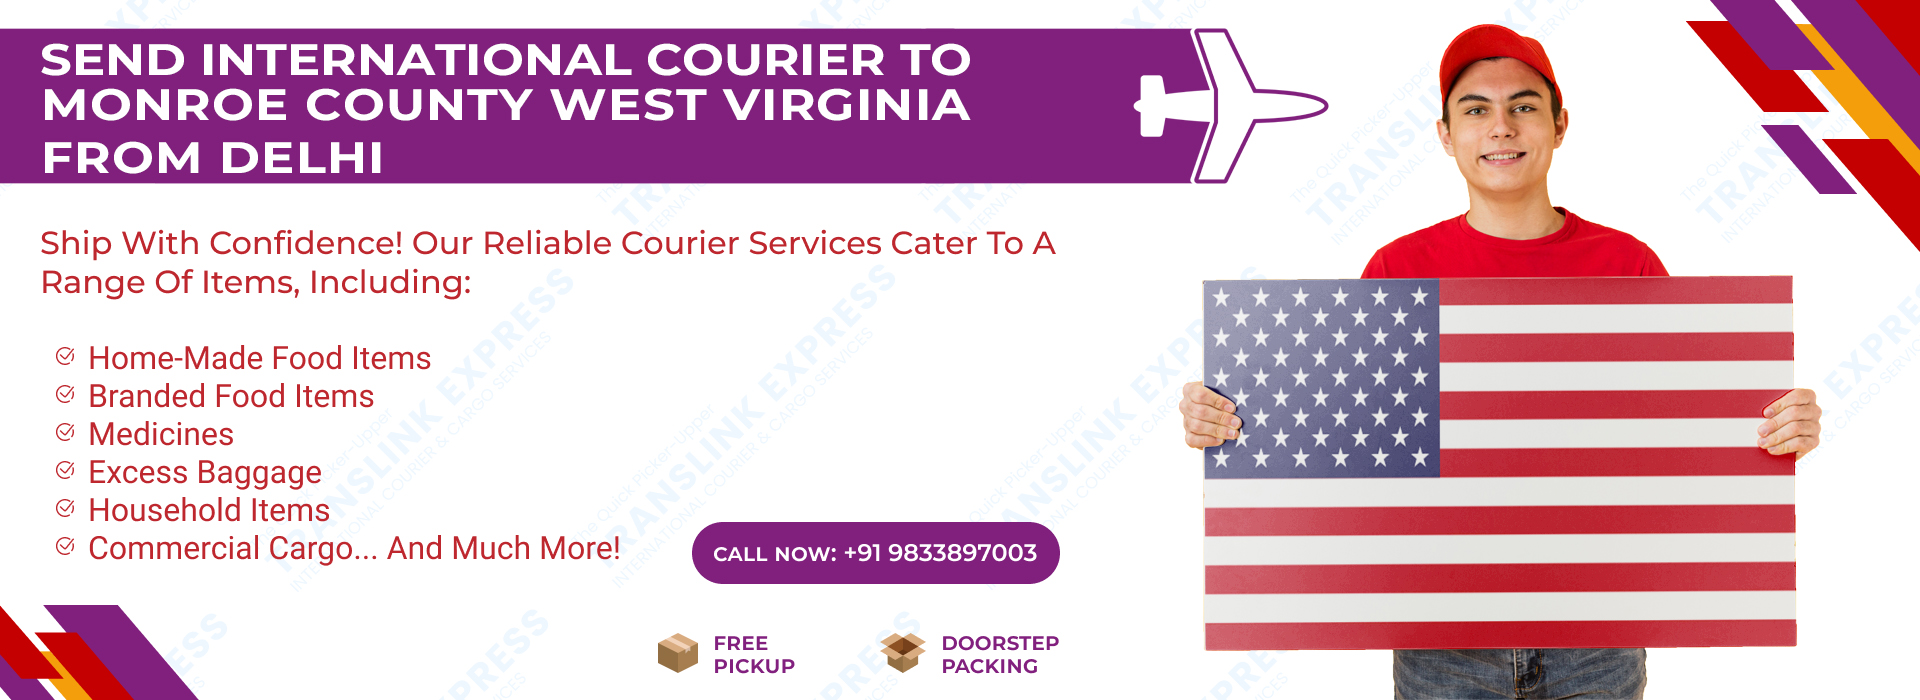 Courier to Monroe County West Virginia From Delhi